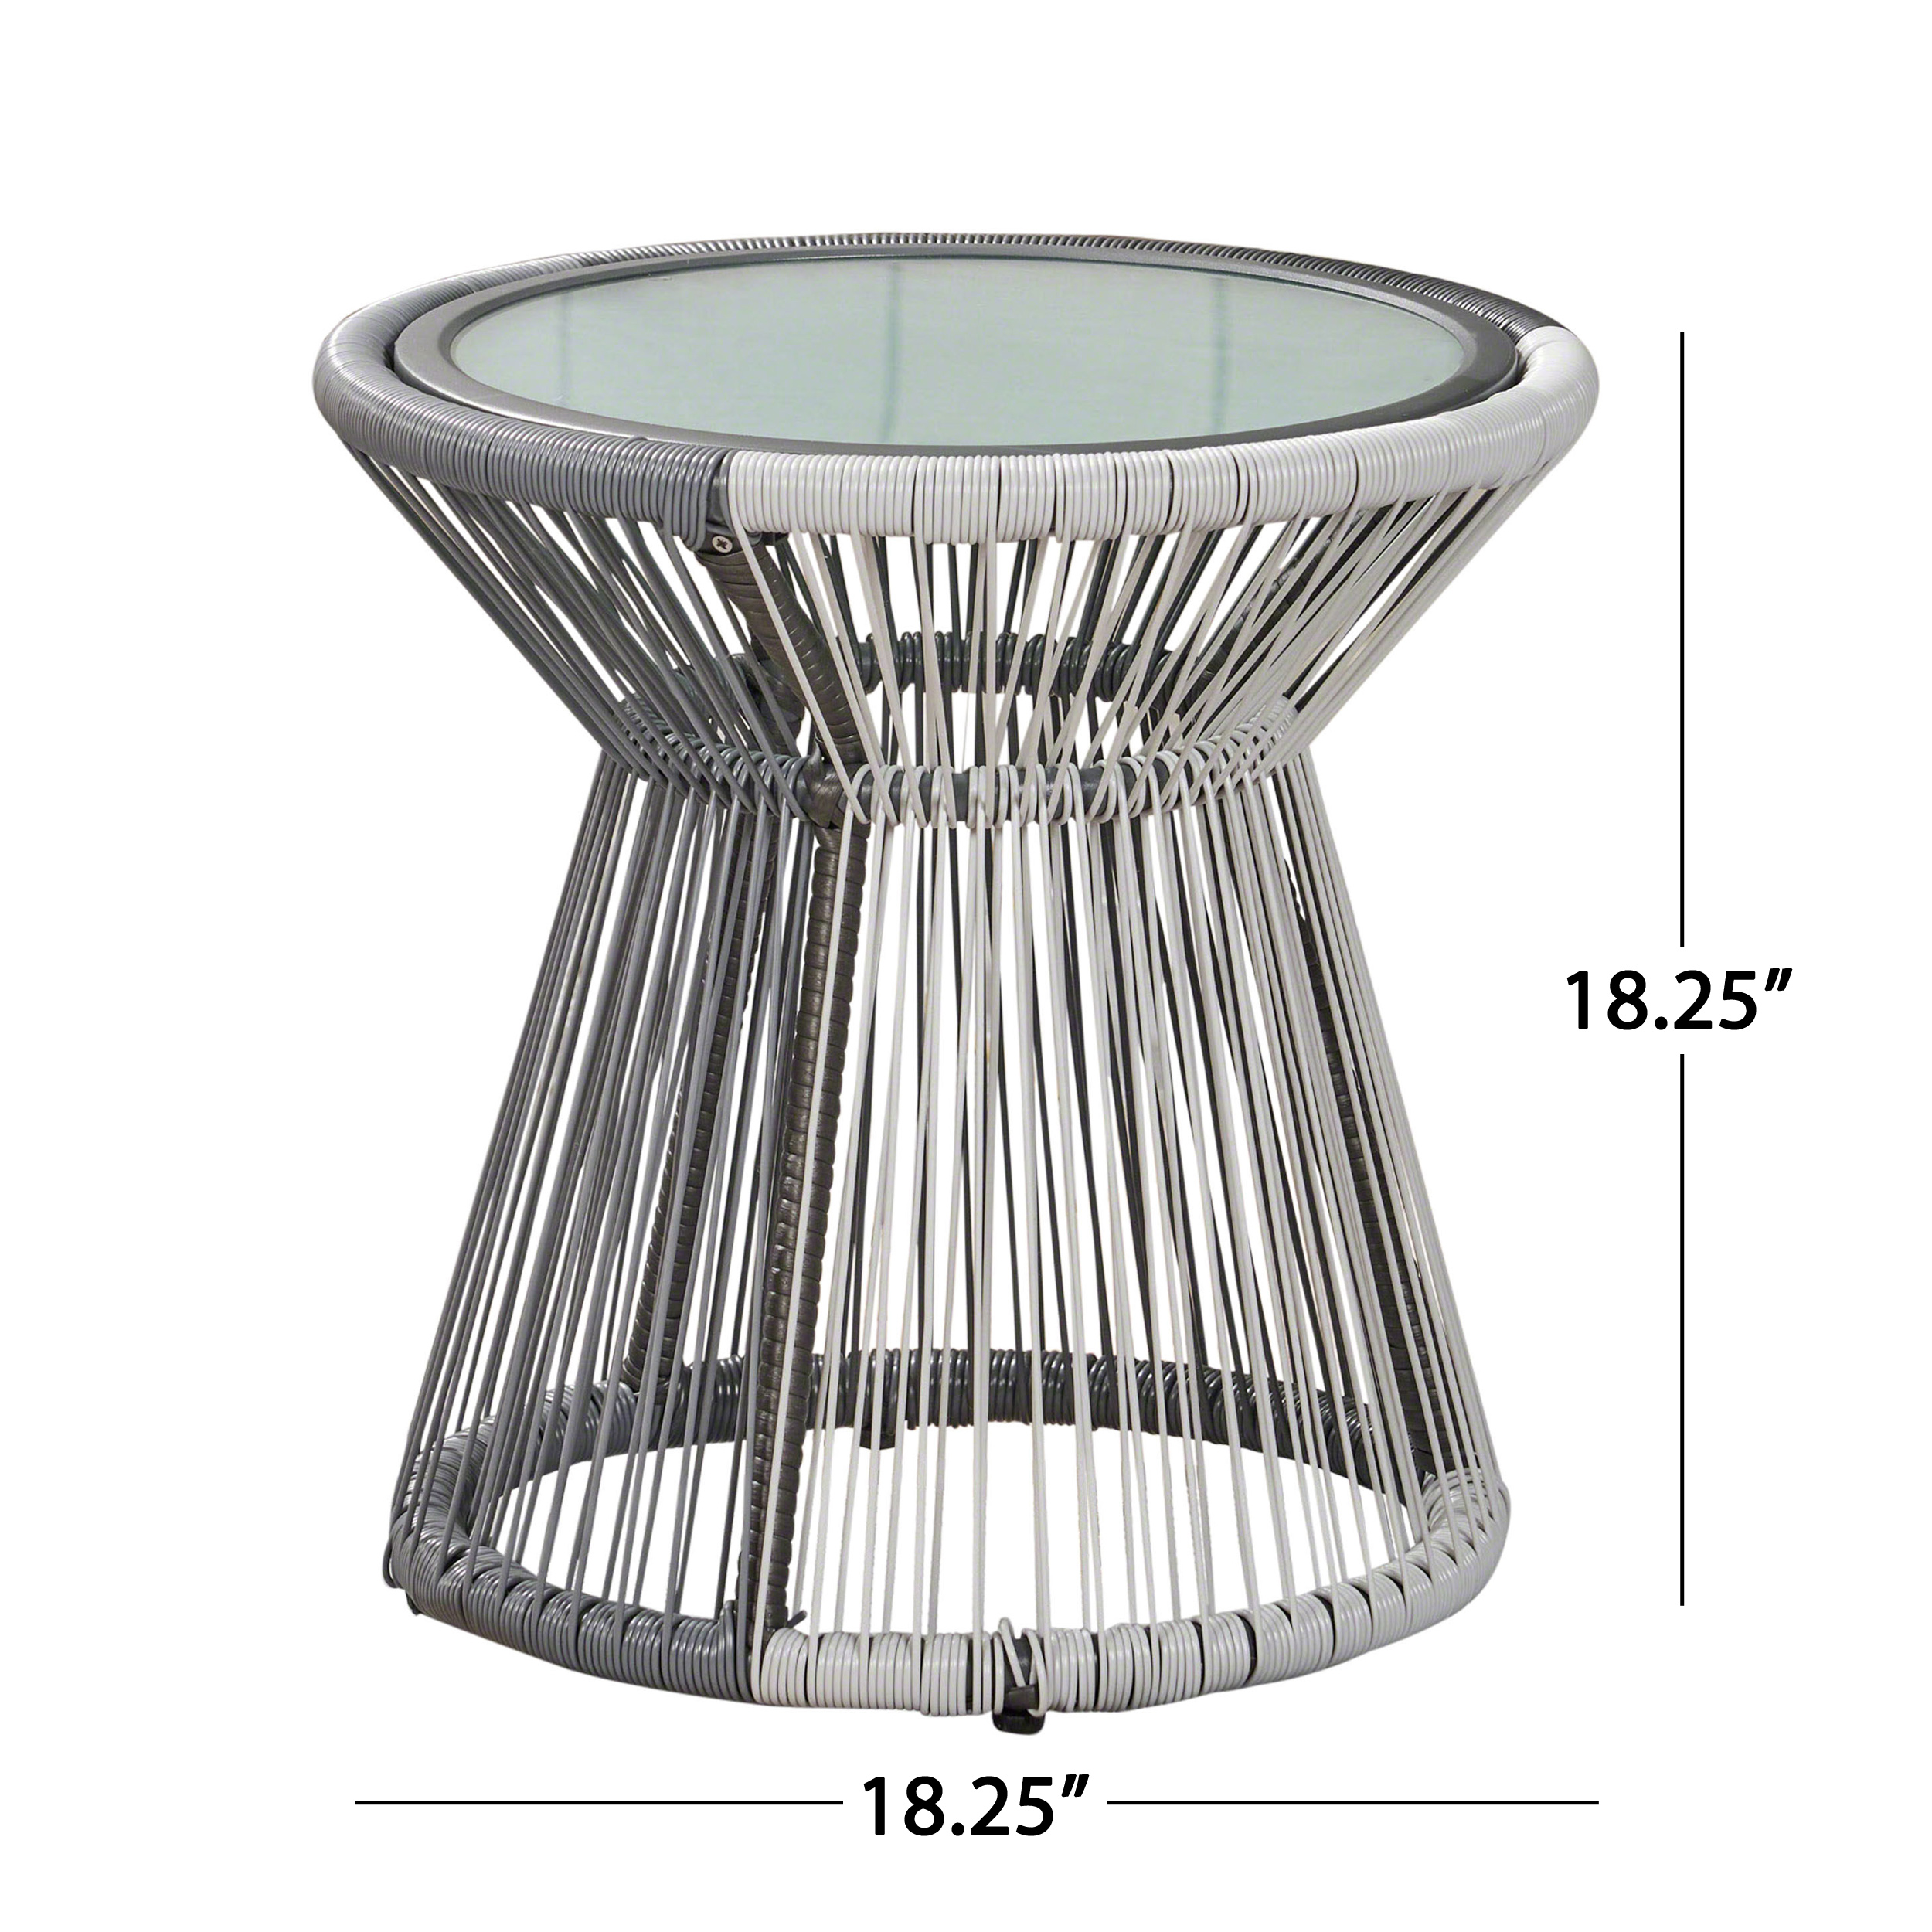 GDF Studio Aiden Outdoor Wicker Side Table with Glass Top, Gray and White - image 4 of 5